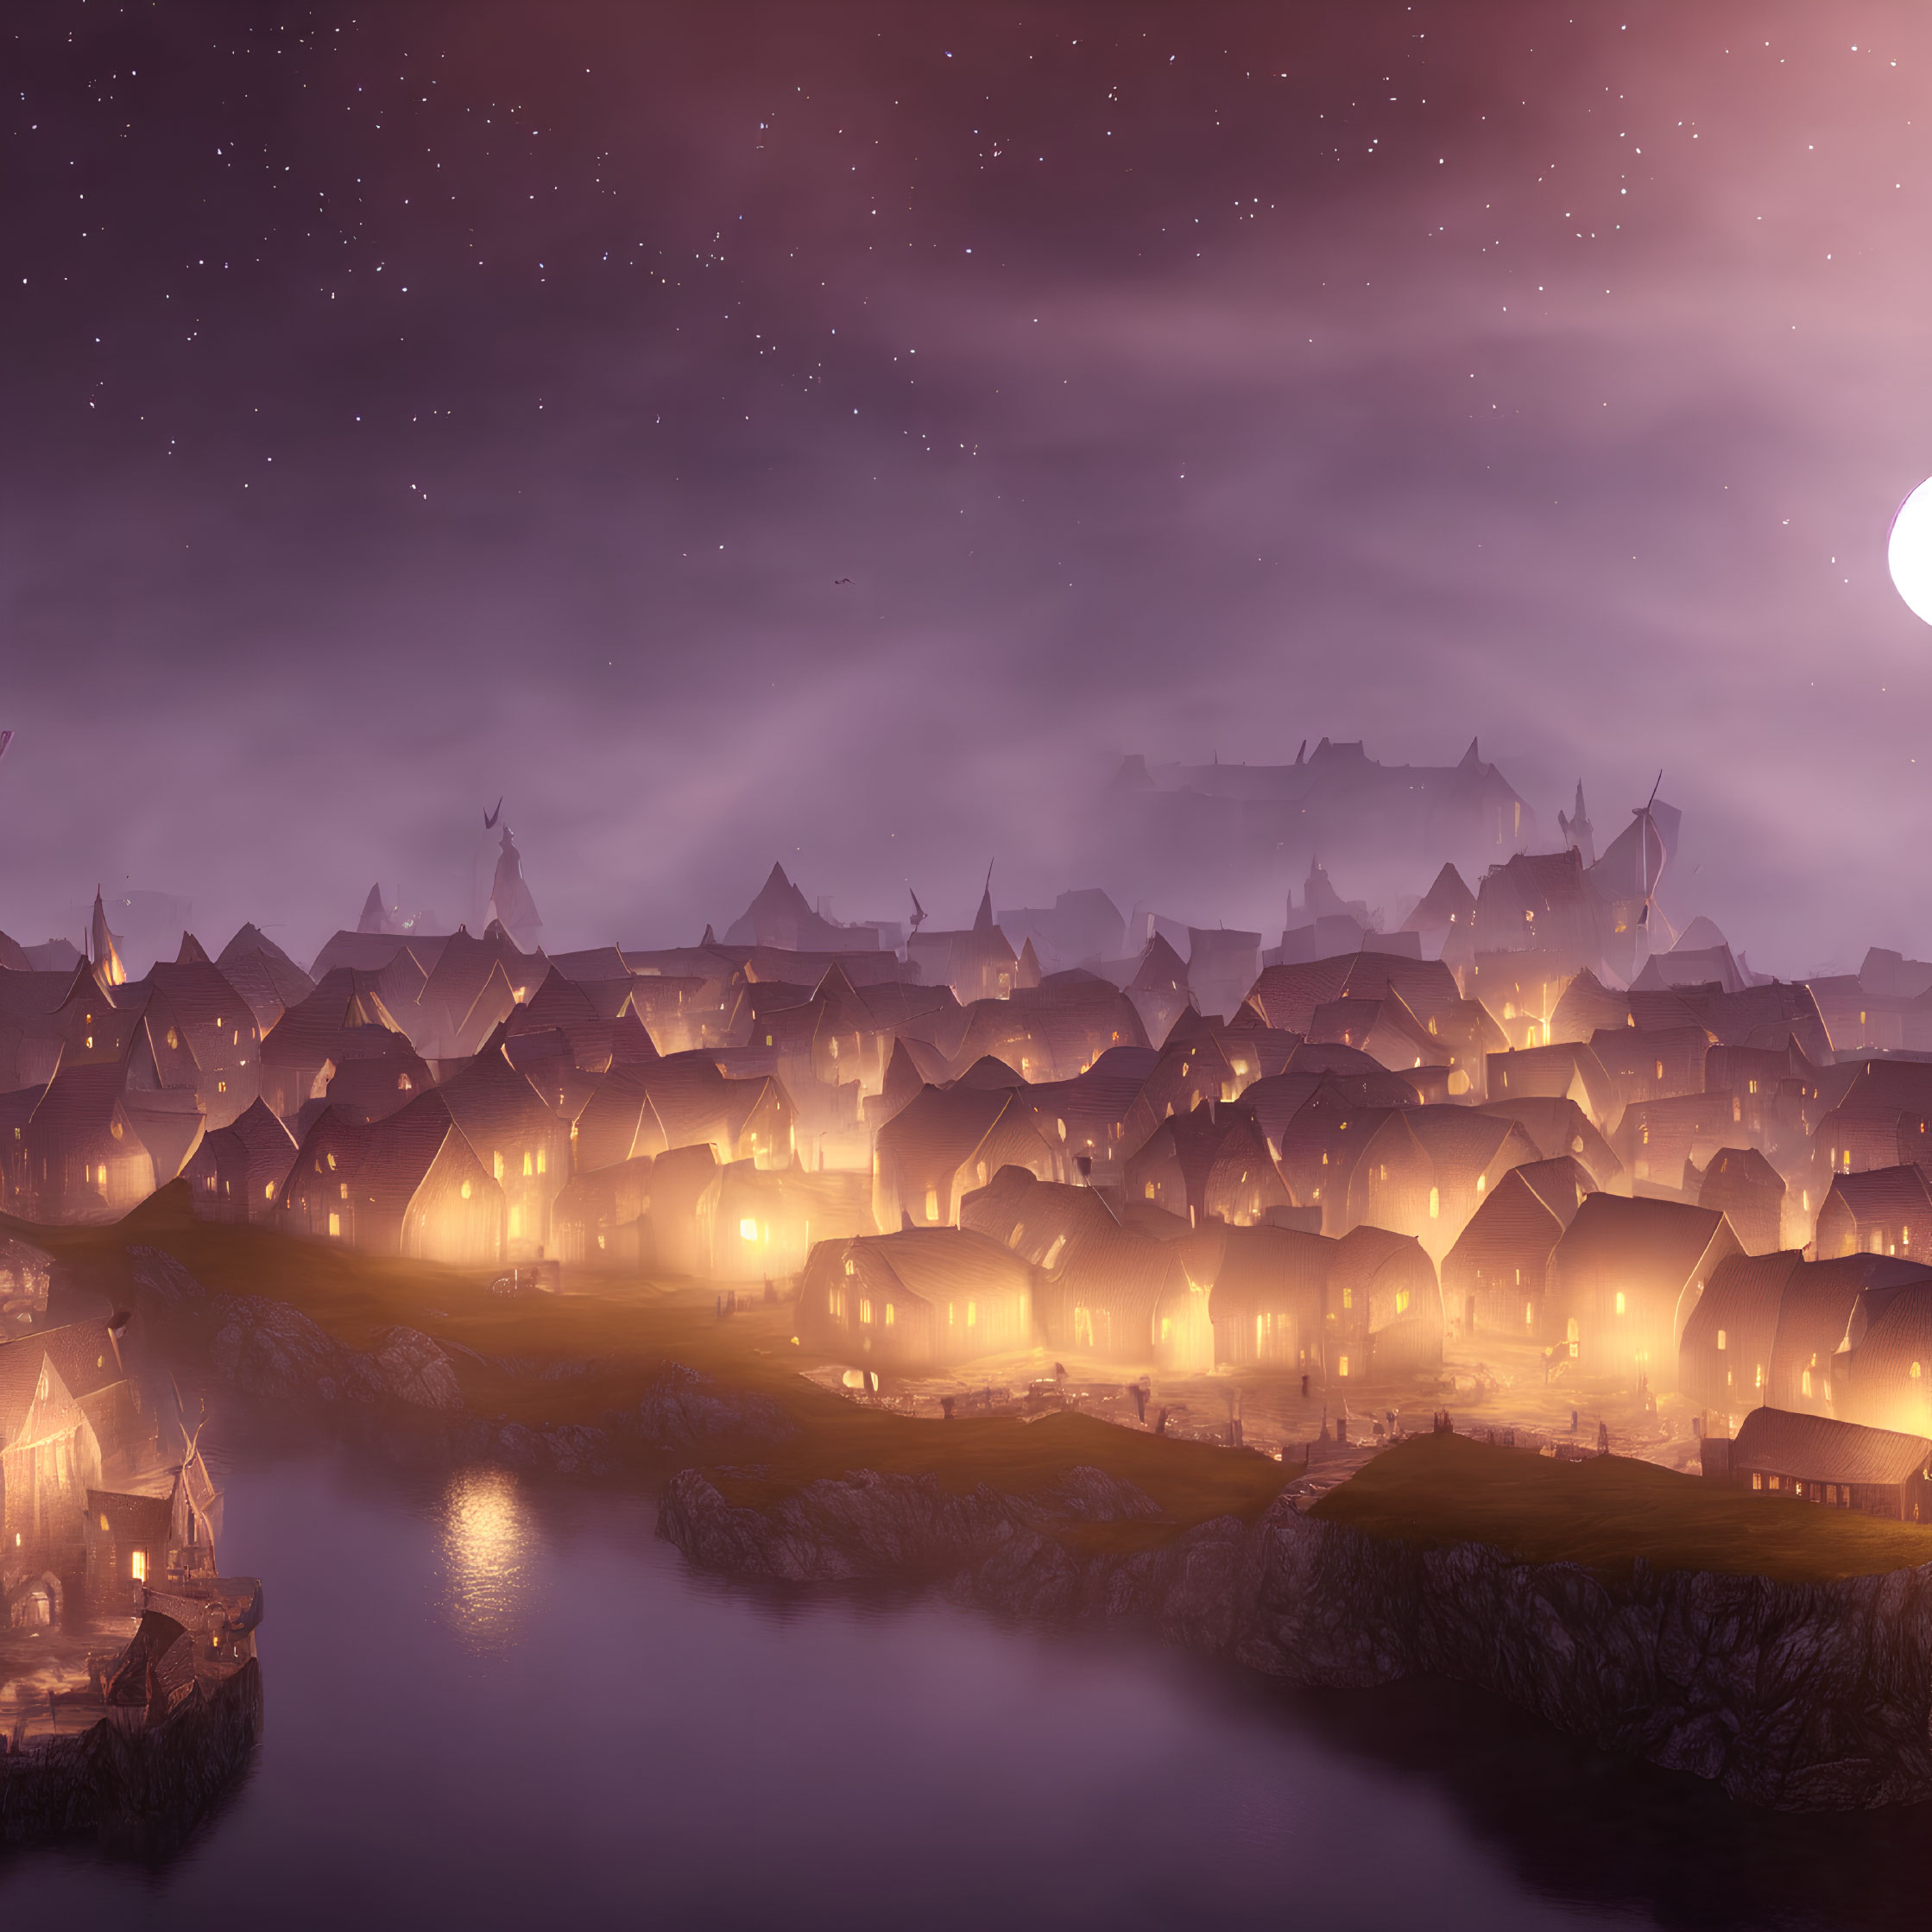 Traditional village night scene with glowing lights, starry sky, and serene water.